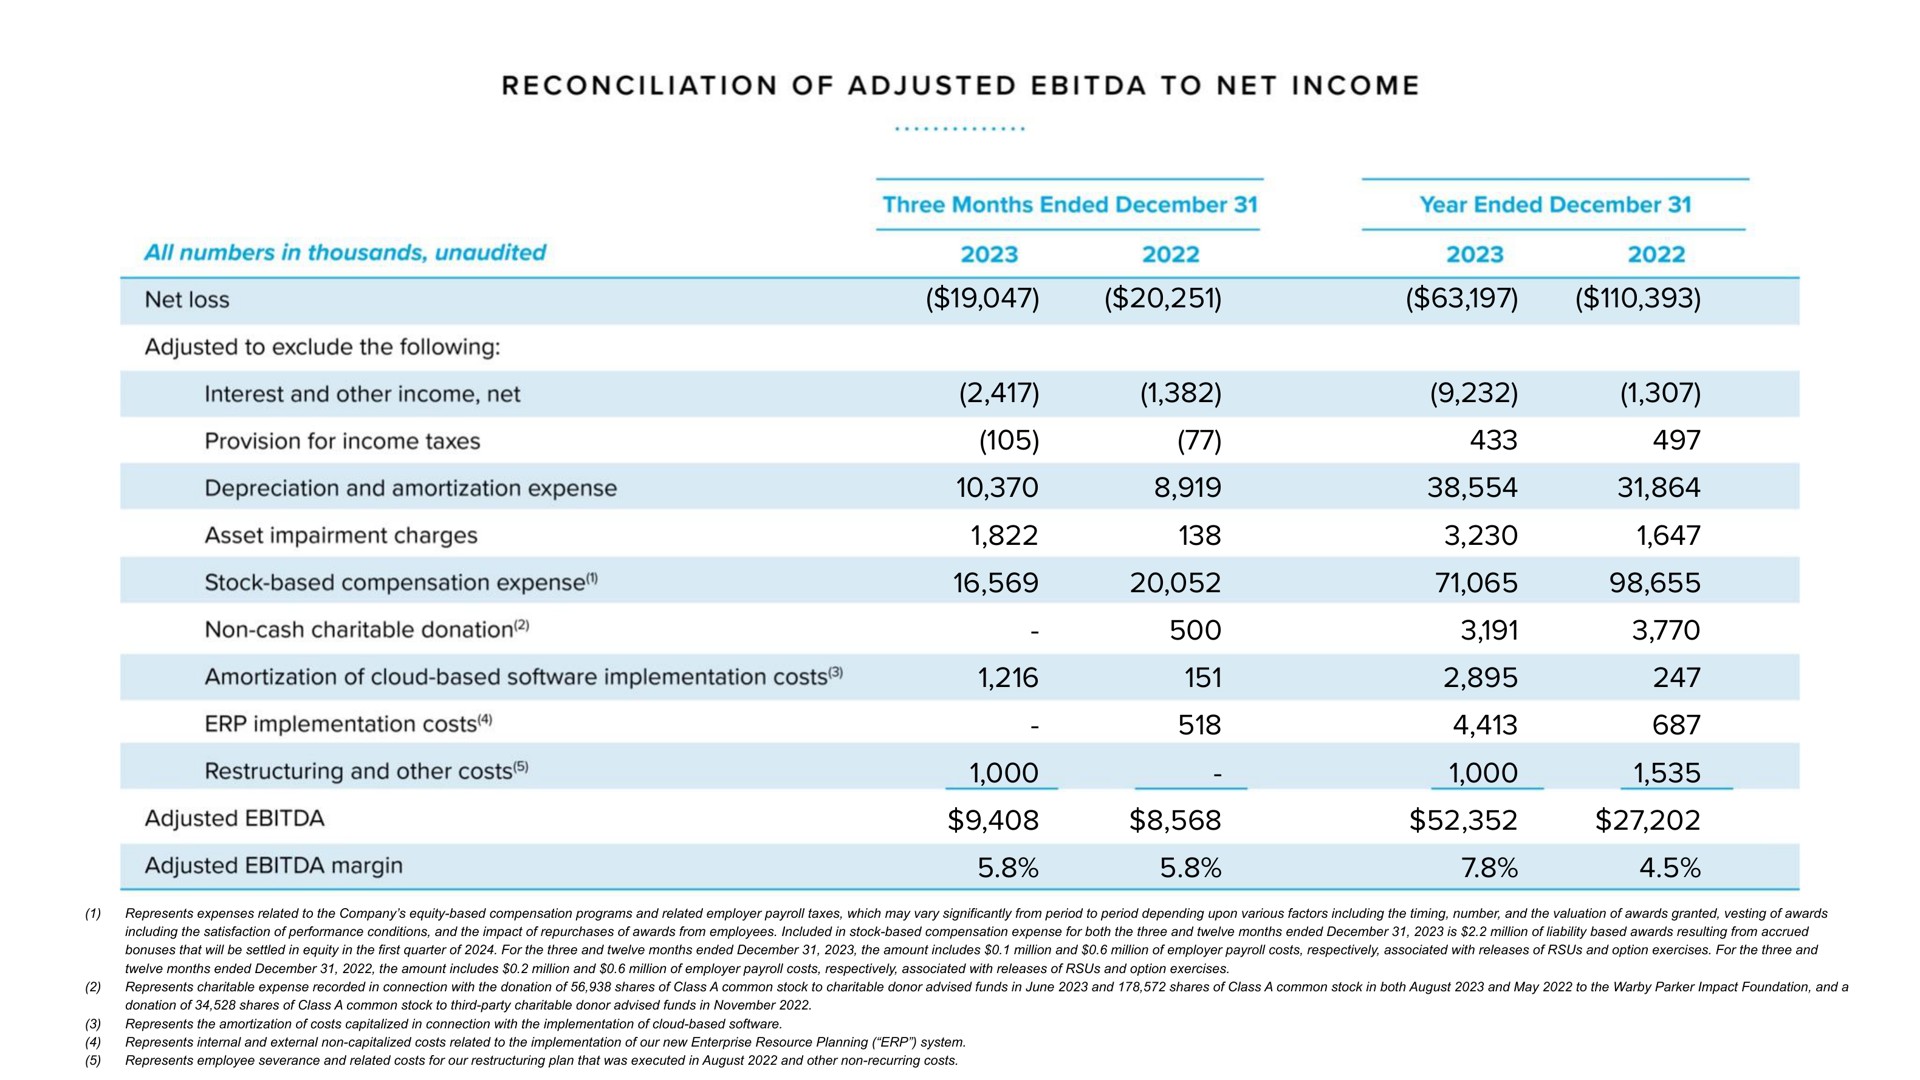 reconciliation of adjusted to net income net loss interest and other income net provision for income taxes asset impairment charges amortization of cloud based implementation costs implementation costs and other costs adjusted | Warby Parker